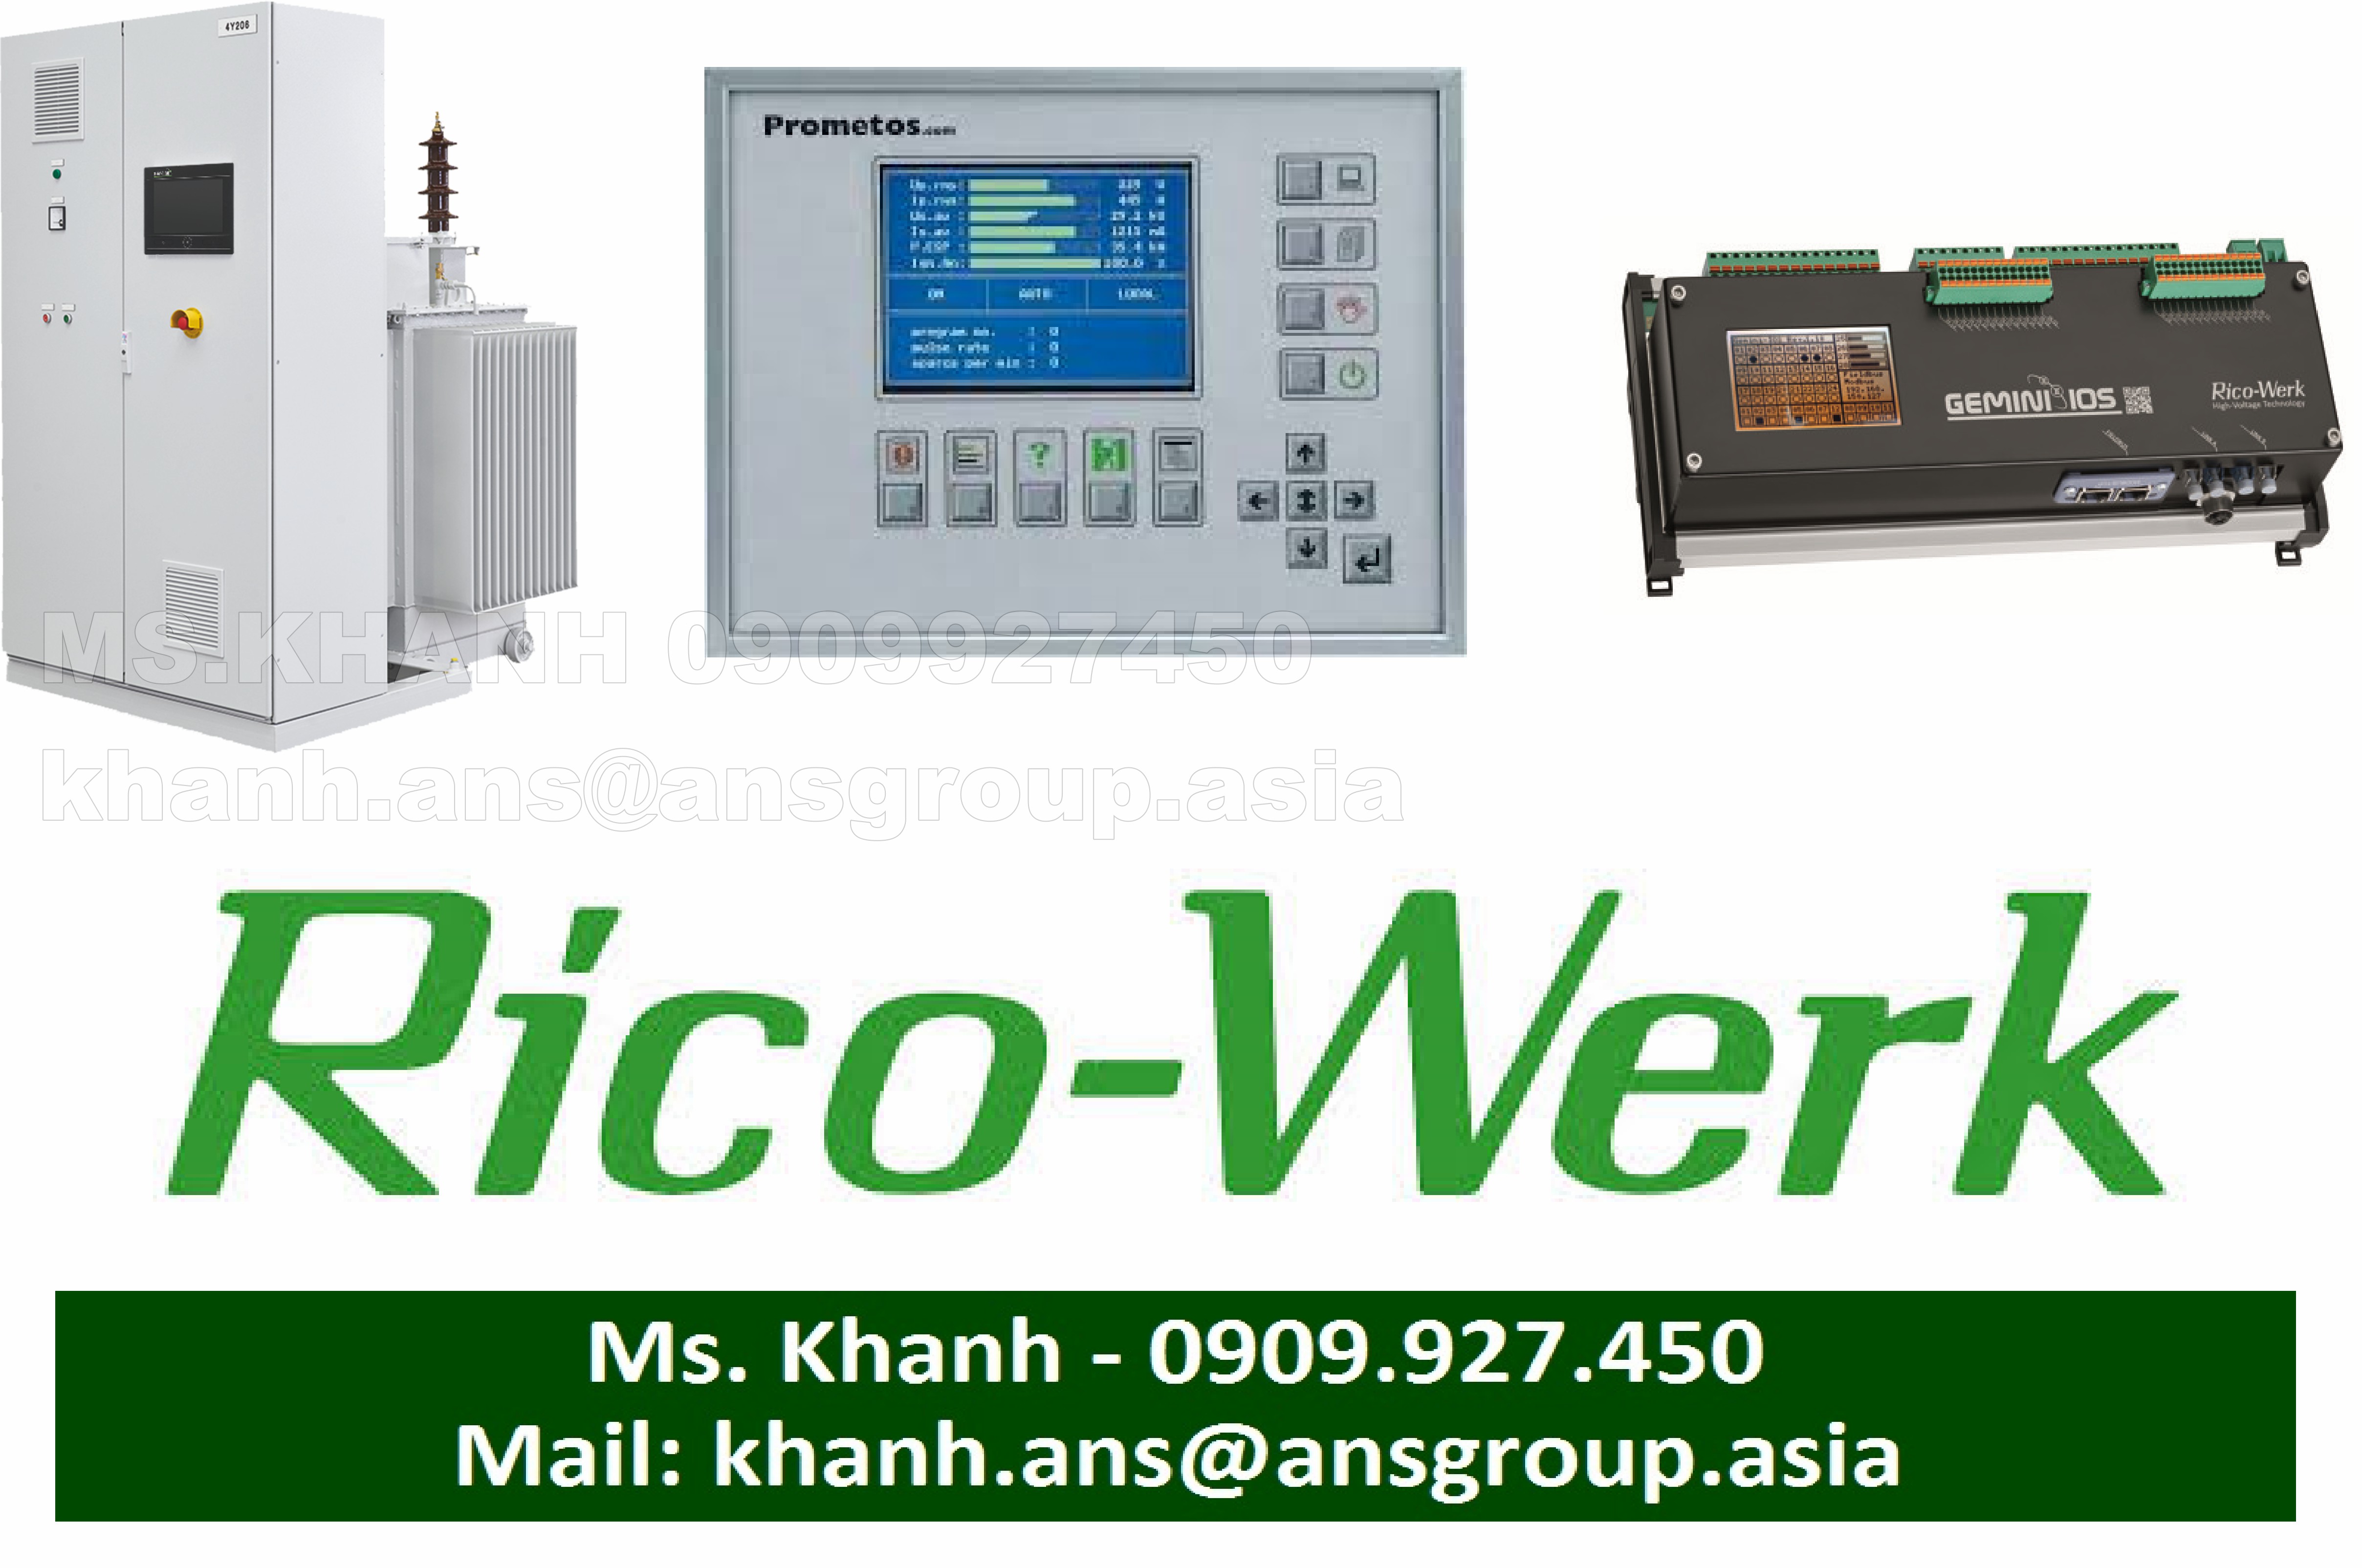 thiet-bi-analog-signal-divider-without-isolated-test-amplifier-stock-no-591-296-rico-werk-vietnam.png